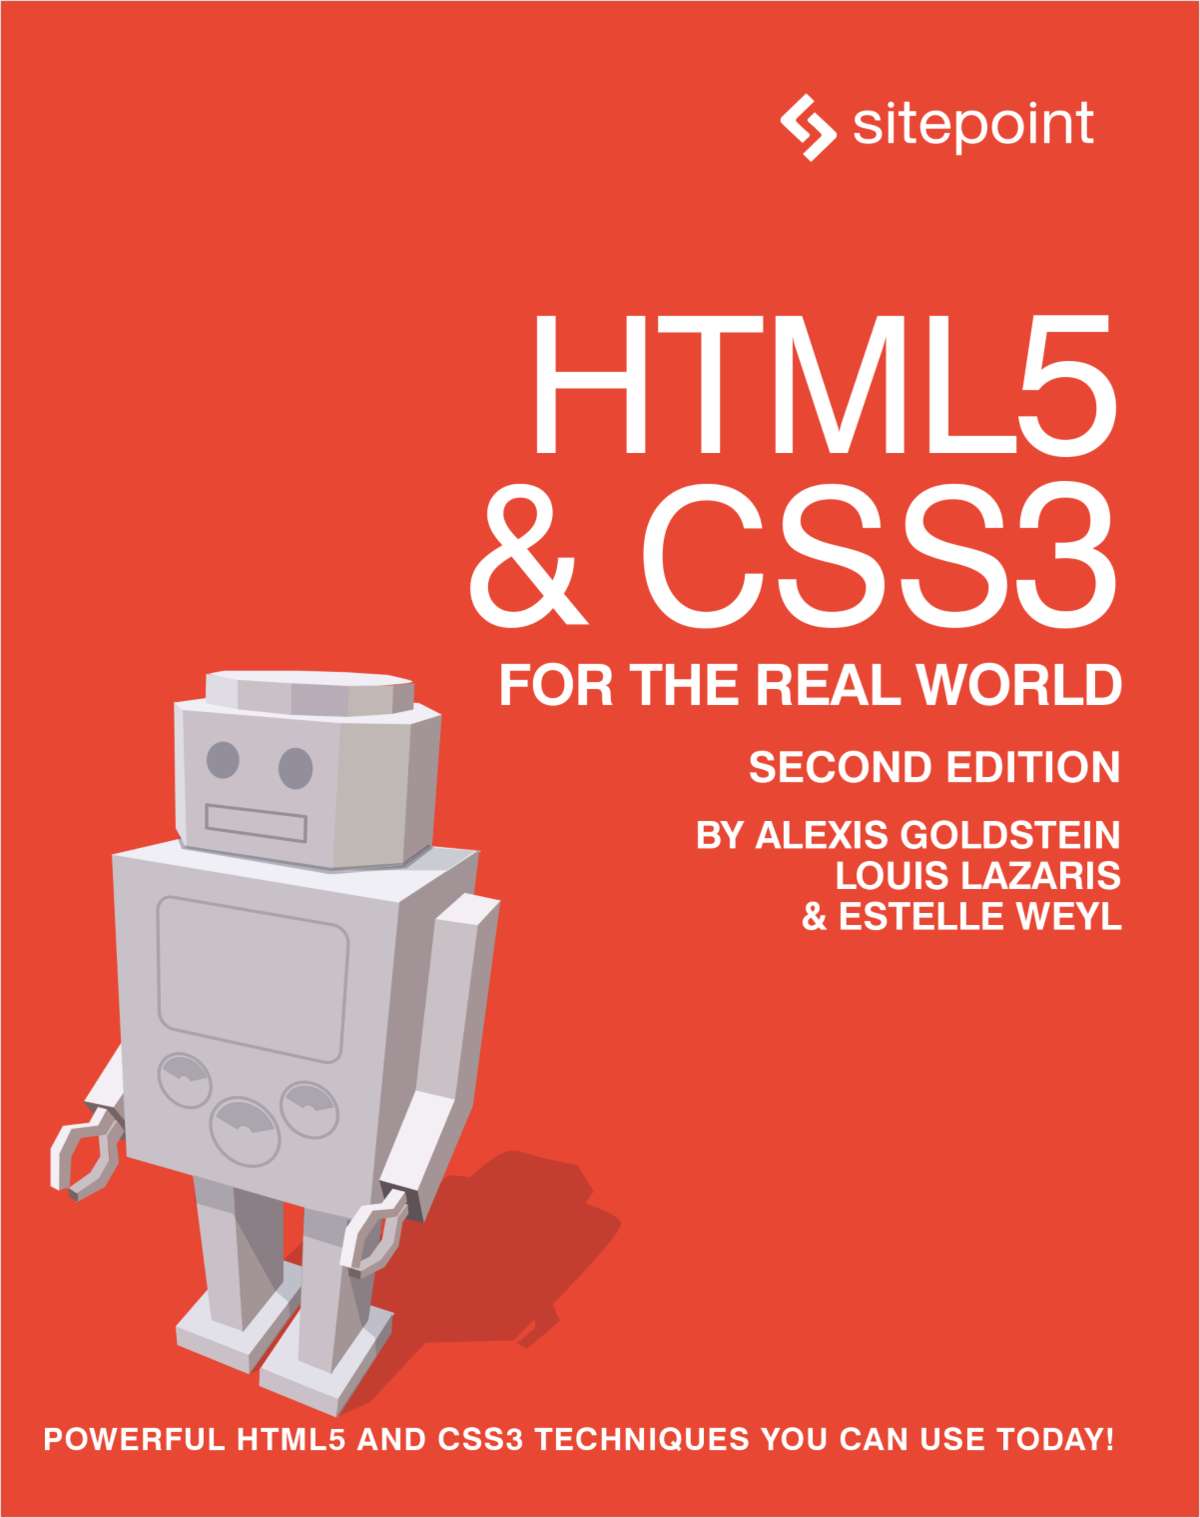 HTML5 & CSS3 for the Real World